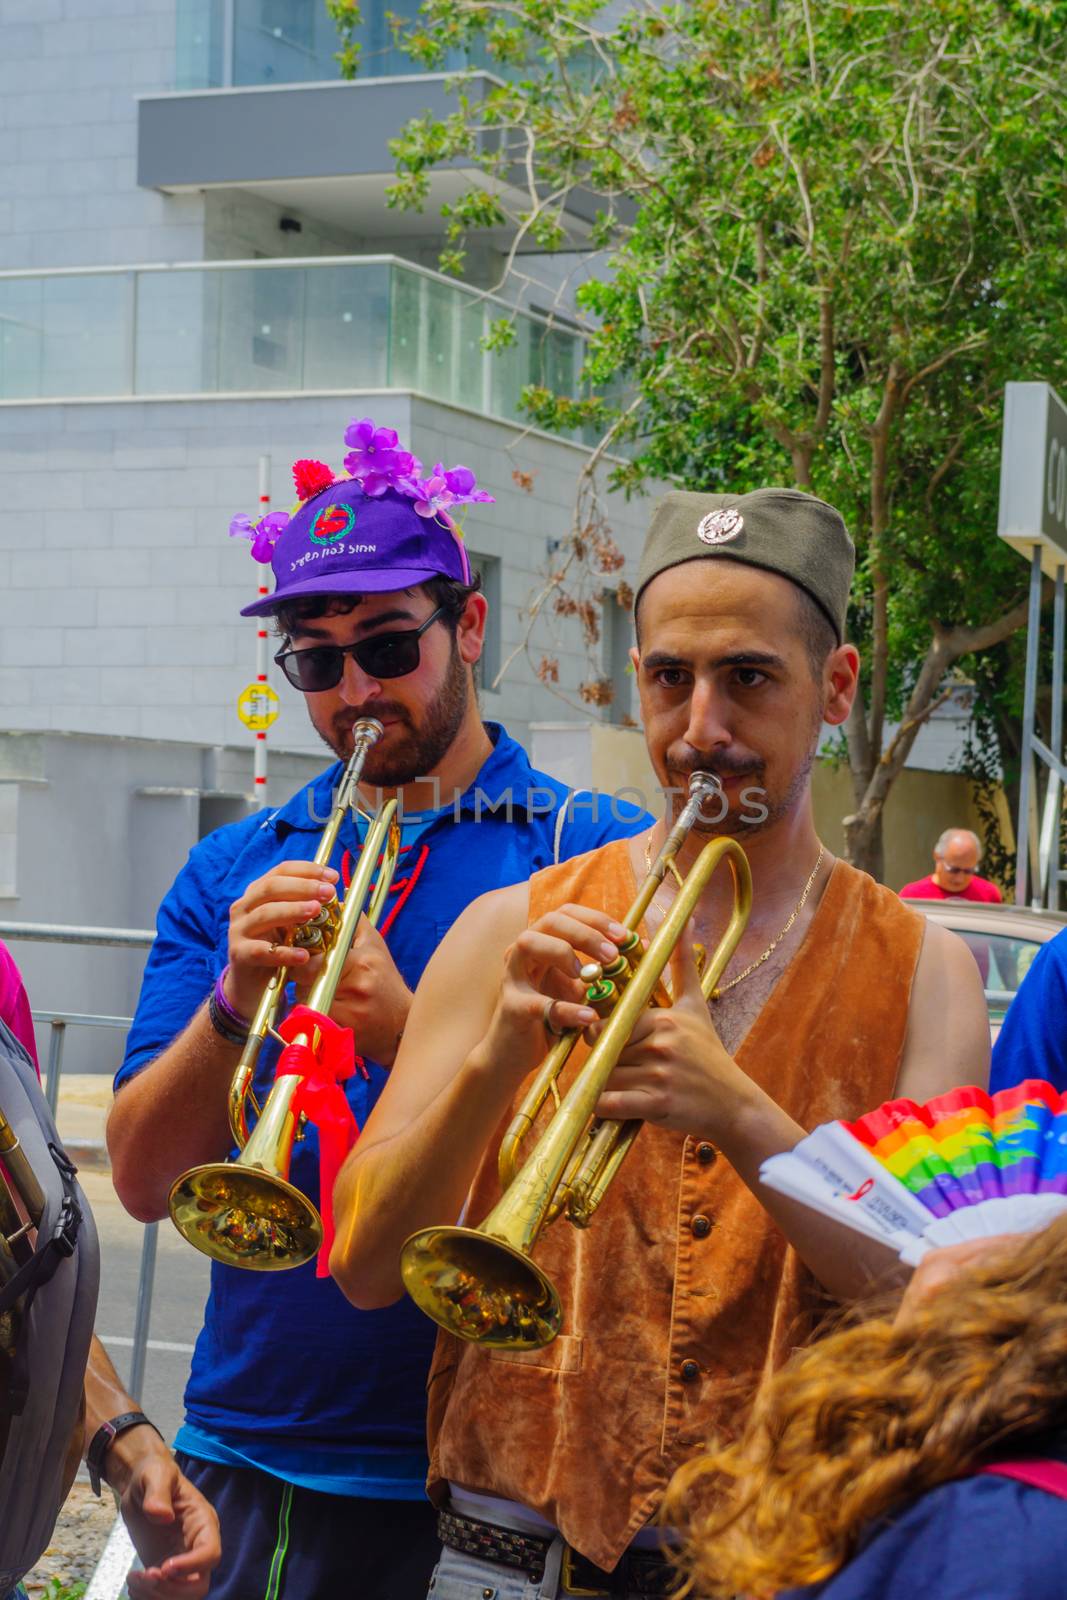 HAIFA, Israel - June 30, 2017: People play music, as part of the annual pride parade of the LGBT community, in the streets of Haifa, Israel